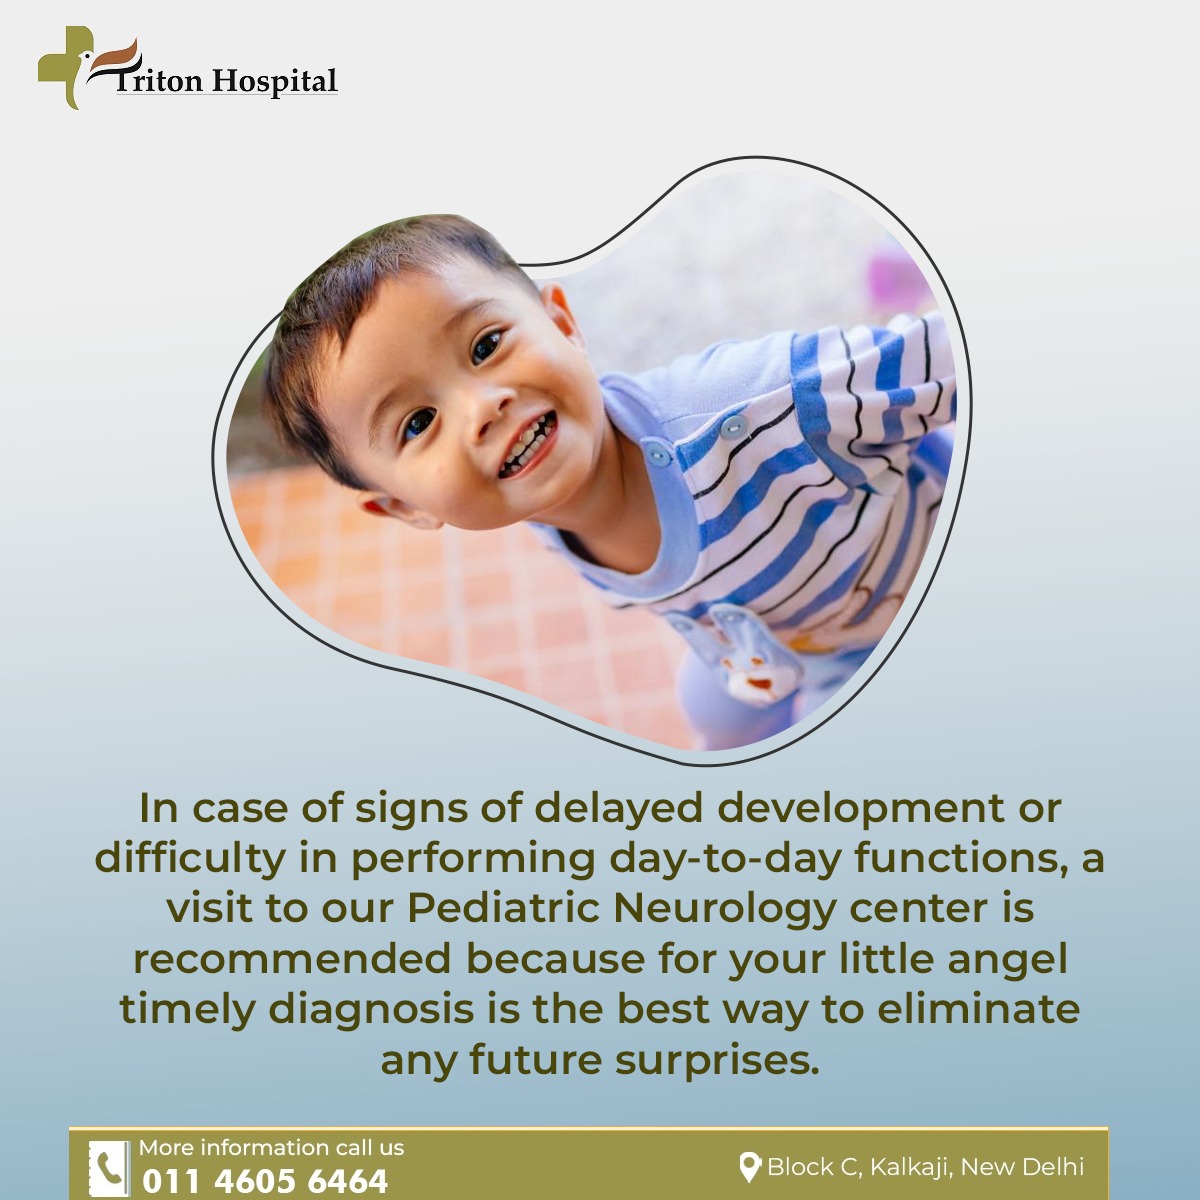 Delay in speech and language development is the most common developmental disorder in children aged 3 to 16 years. The prevalence of this disorder ranges from 1% to 32% in the normal population.

#Triton #Treatment #care #tritonhospital #Delayinspeech 
#childspeech